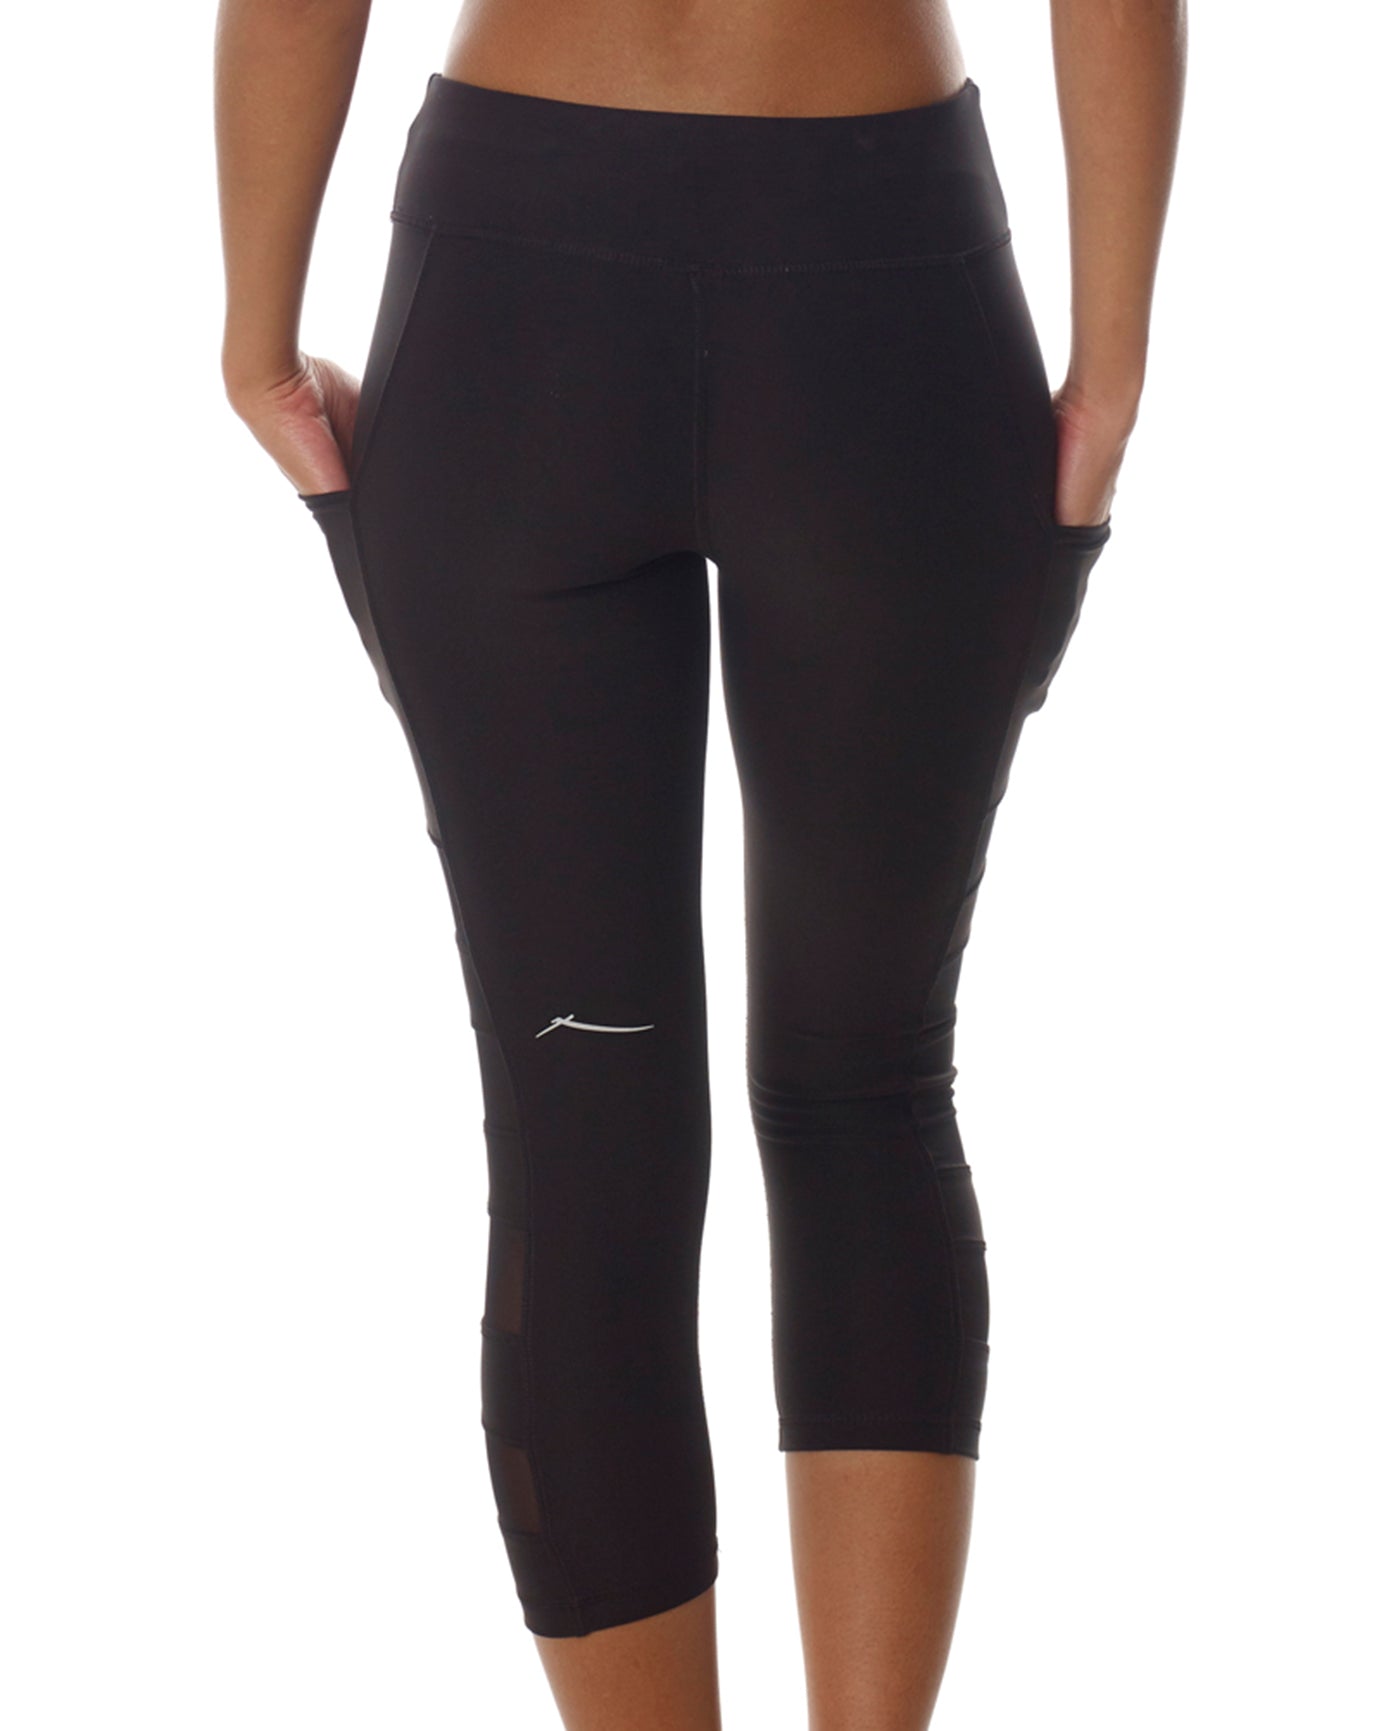 Back View Of X by Gottex Mesh Sides High Waisted Captain Capri Legging with Pocket | XGX BLACK